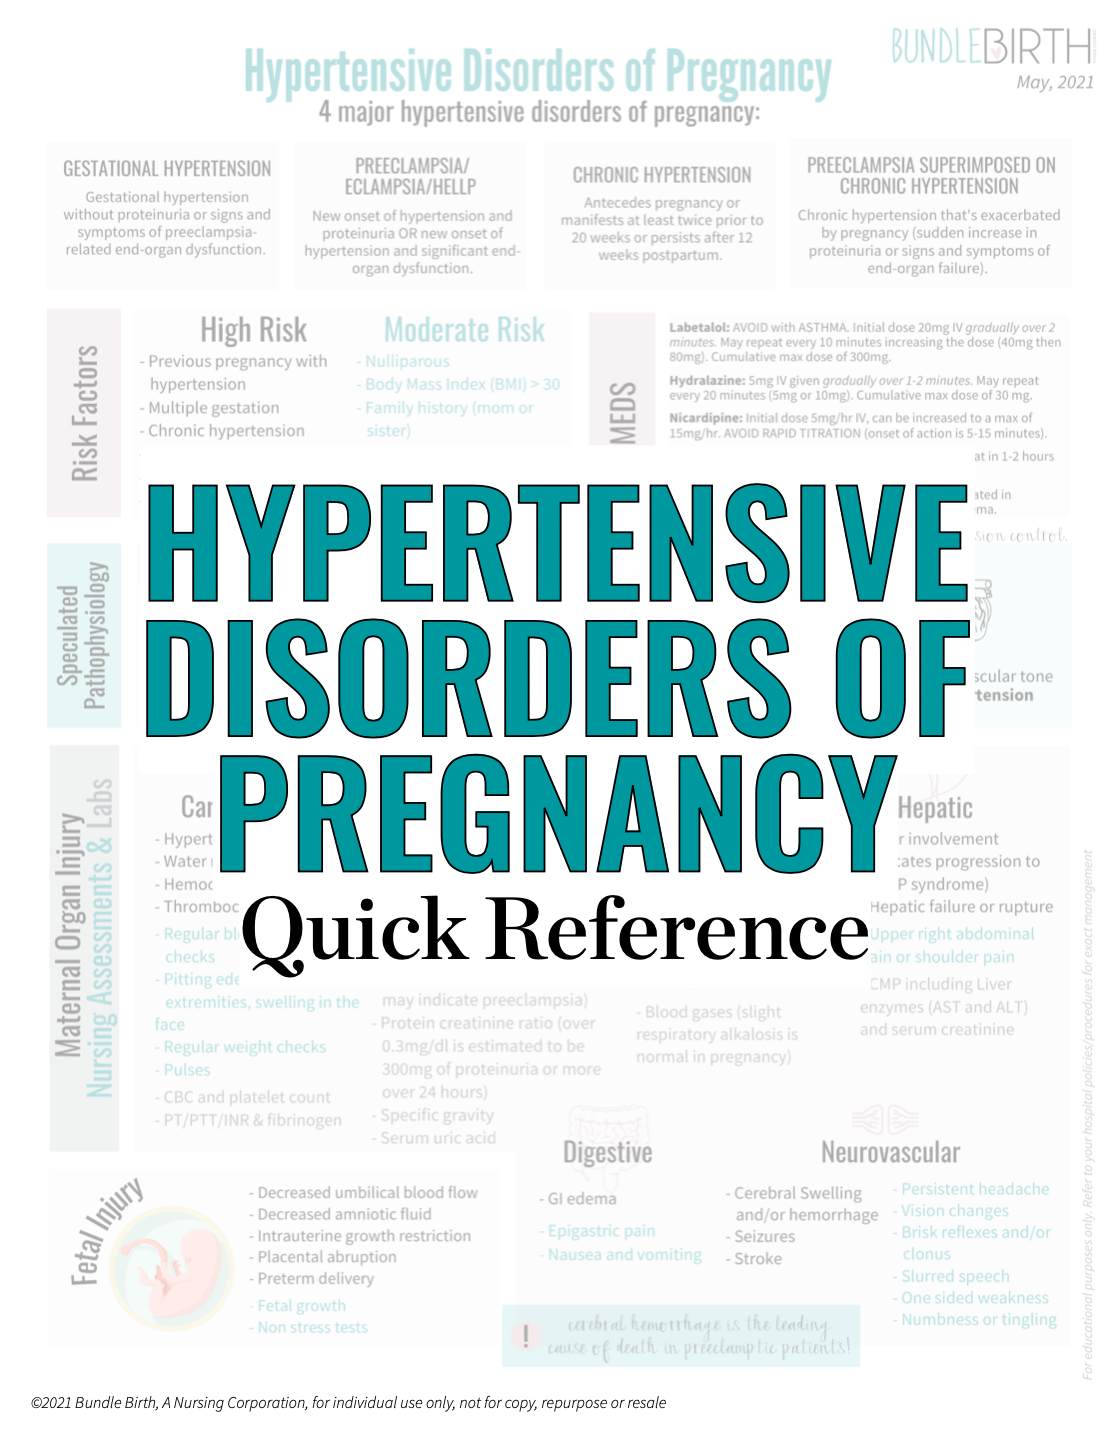 Hypertensive Disorders of Pregnancy Quick Reference